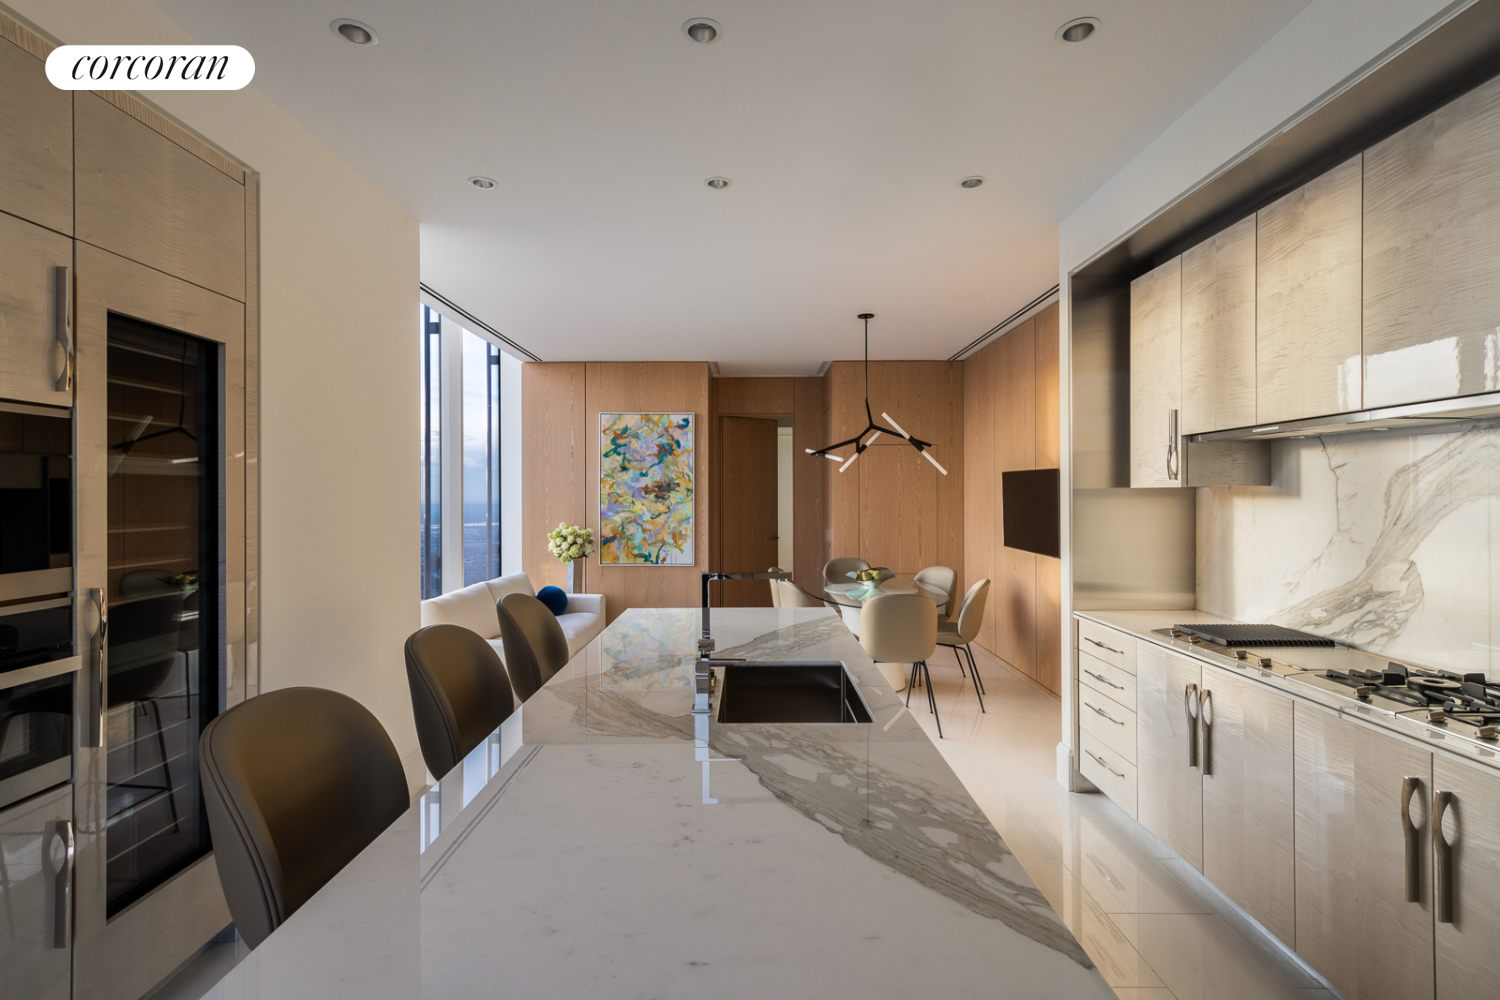 5. Apartments at 217 57TH Street #110 New York, New York 10019 United States